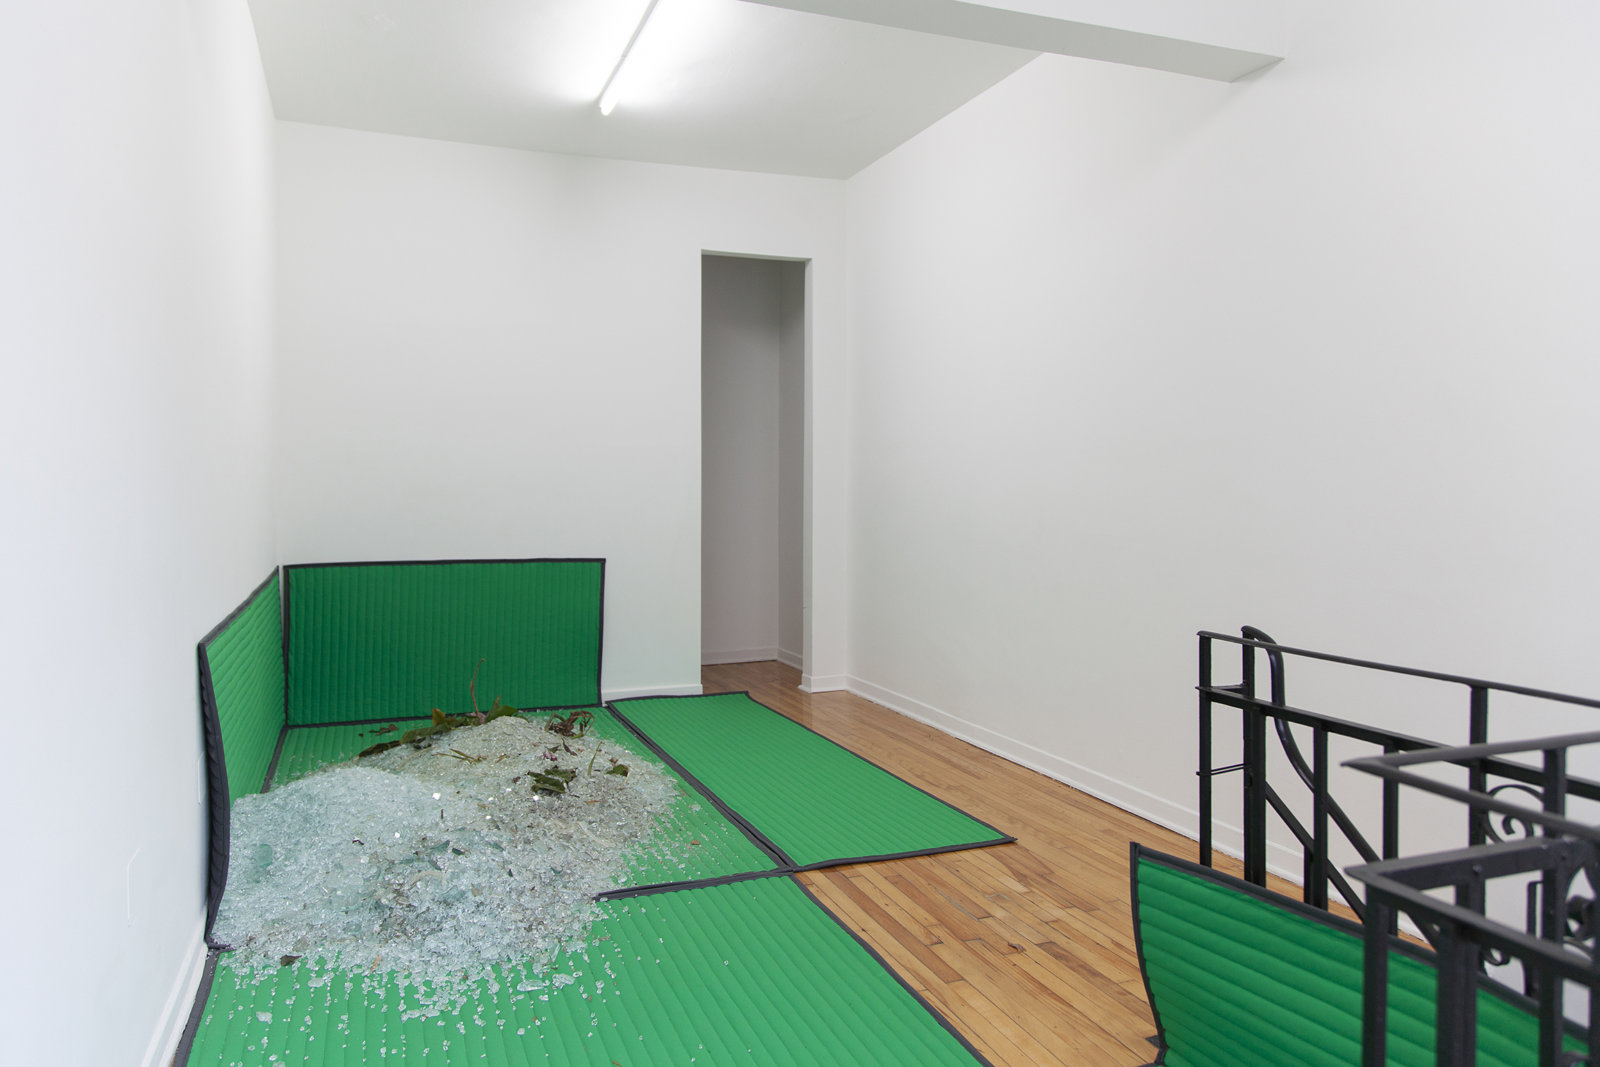 Abbas Akhavan, untitled, 2020, heavy-duty vinyl-reinforced polyester, quilt batting, tropical plants, glass, installation dimensions variable. Installation view, Protocinema at Parc Offsite, Montreal, Canada, 2020